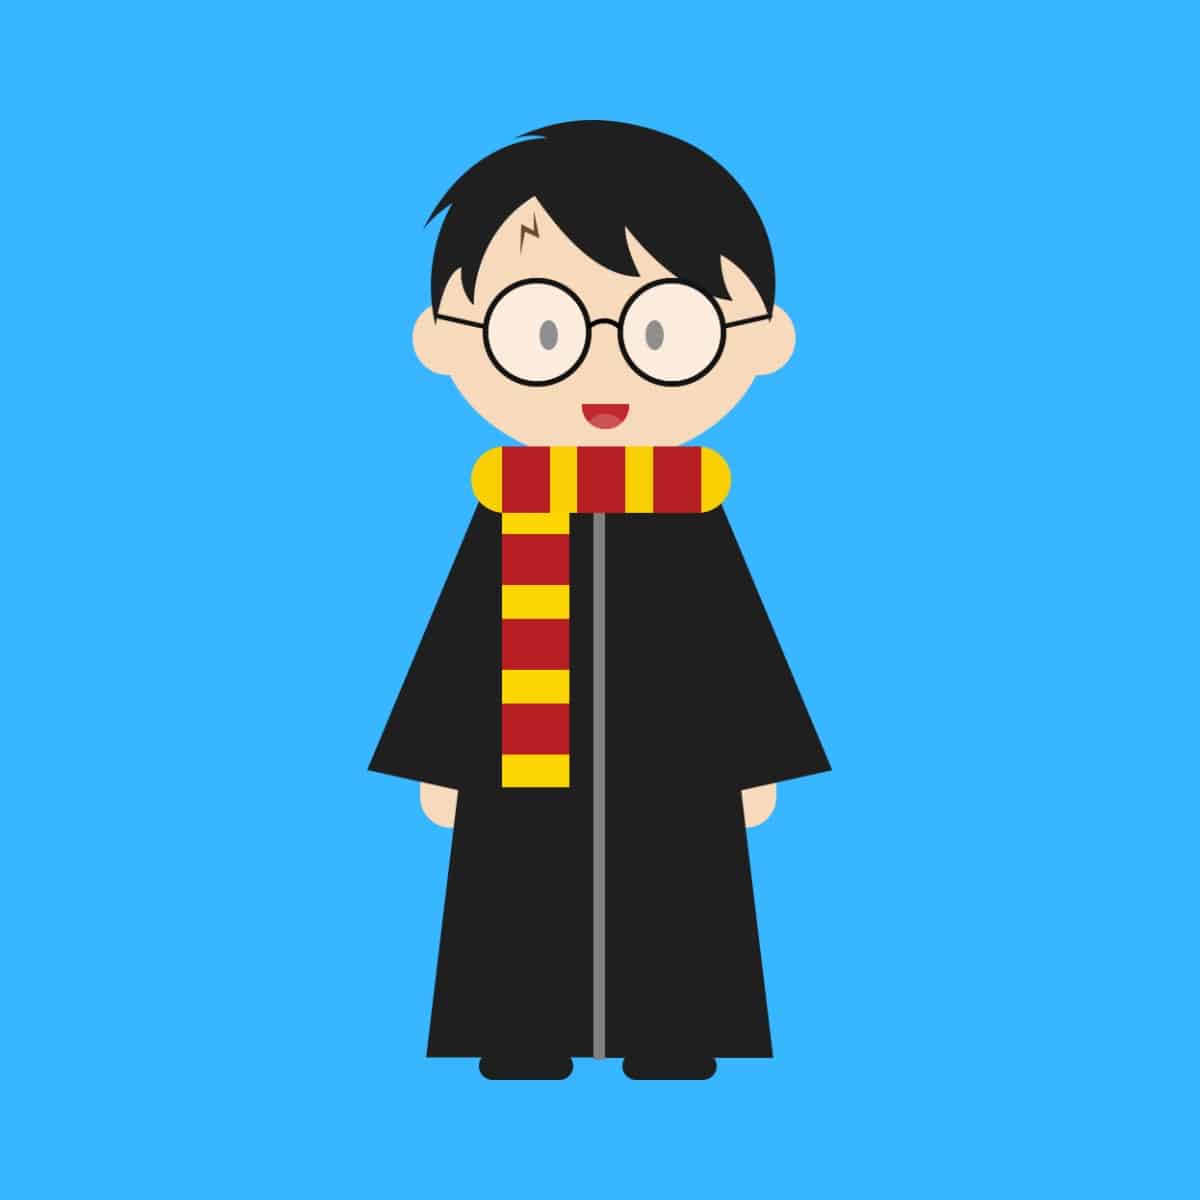 Cartoon graphic of Harry Potter with his robe and scarf on a blue background.